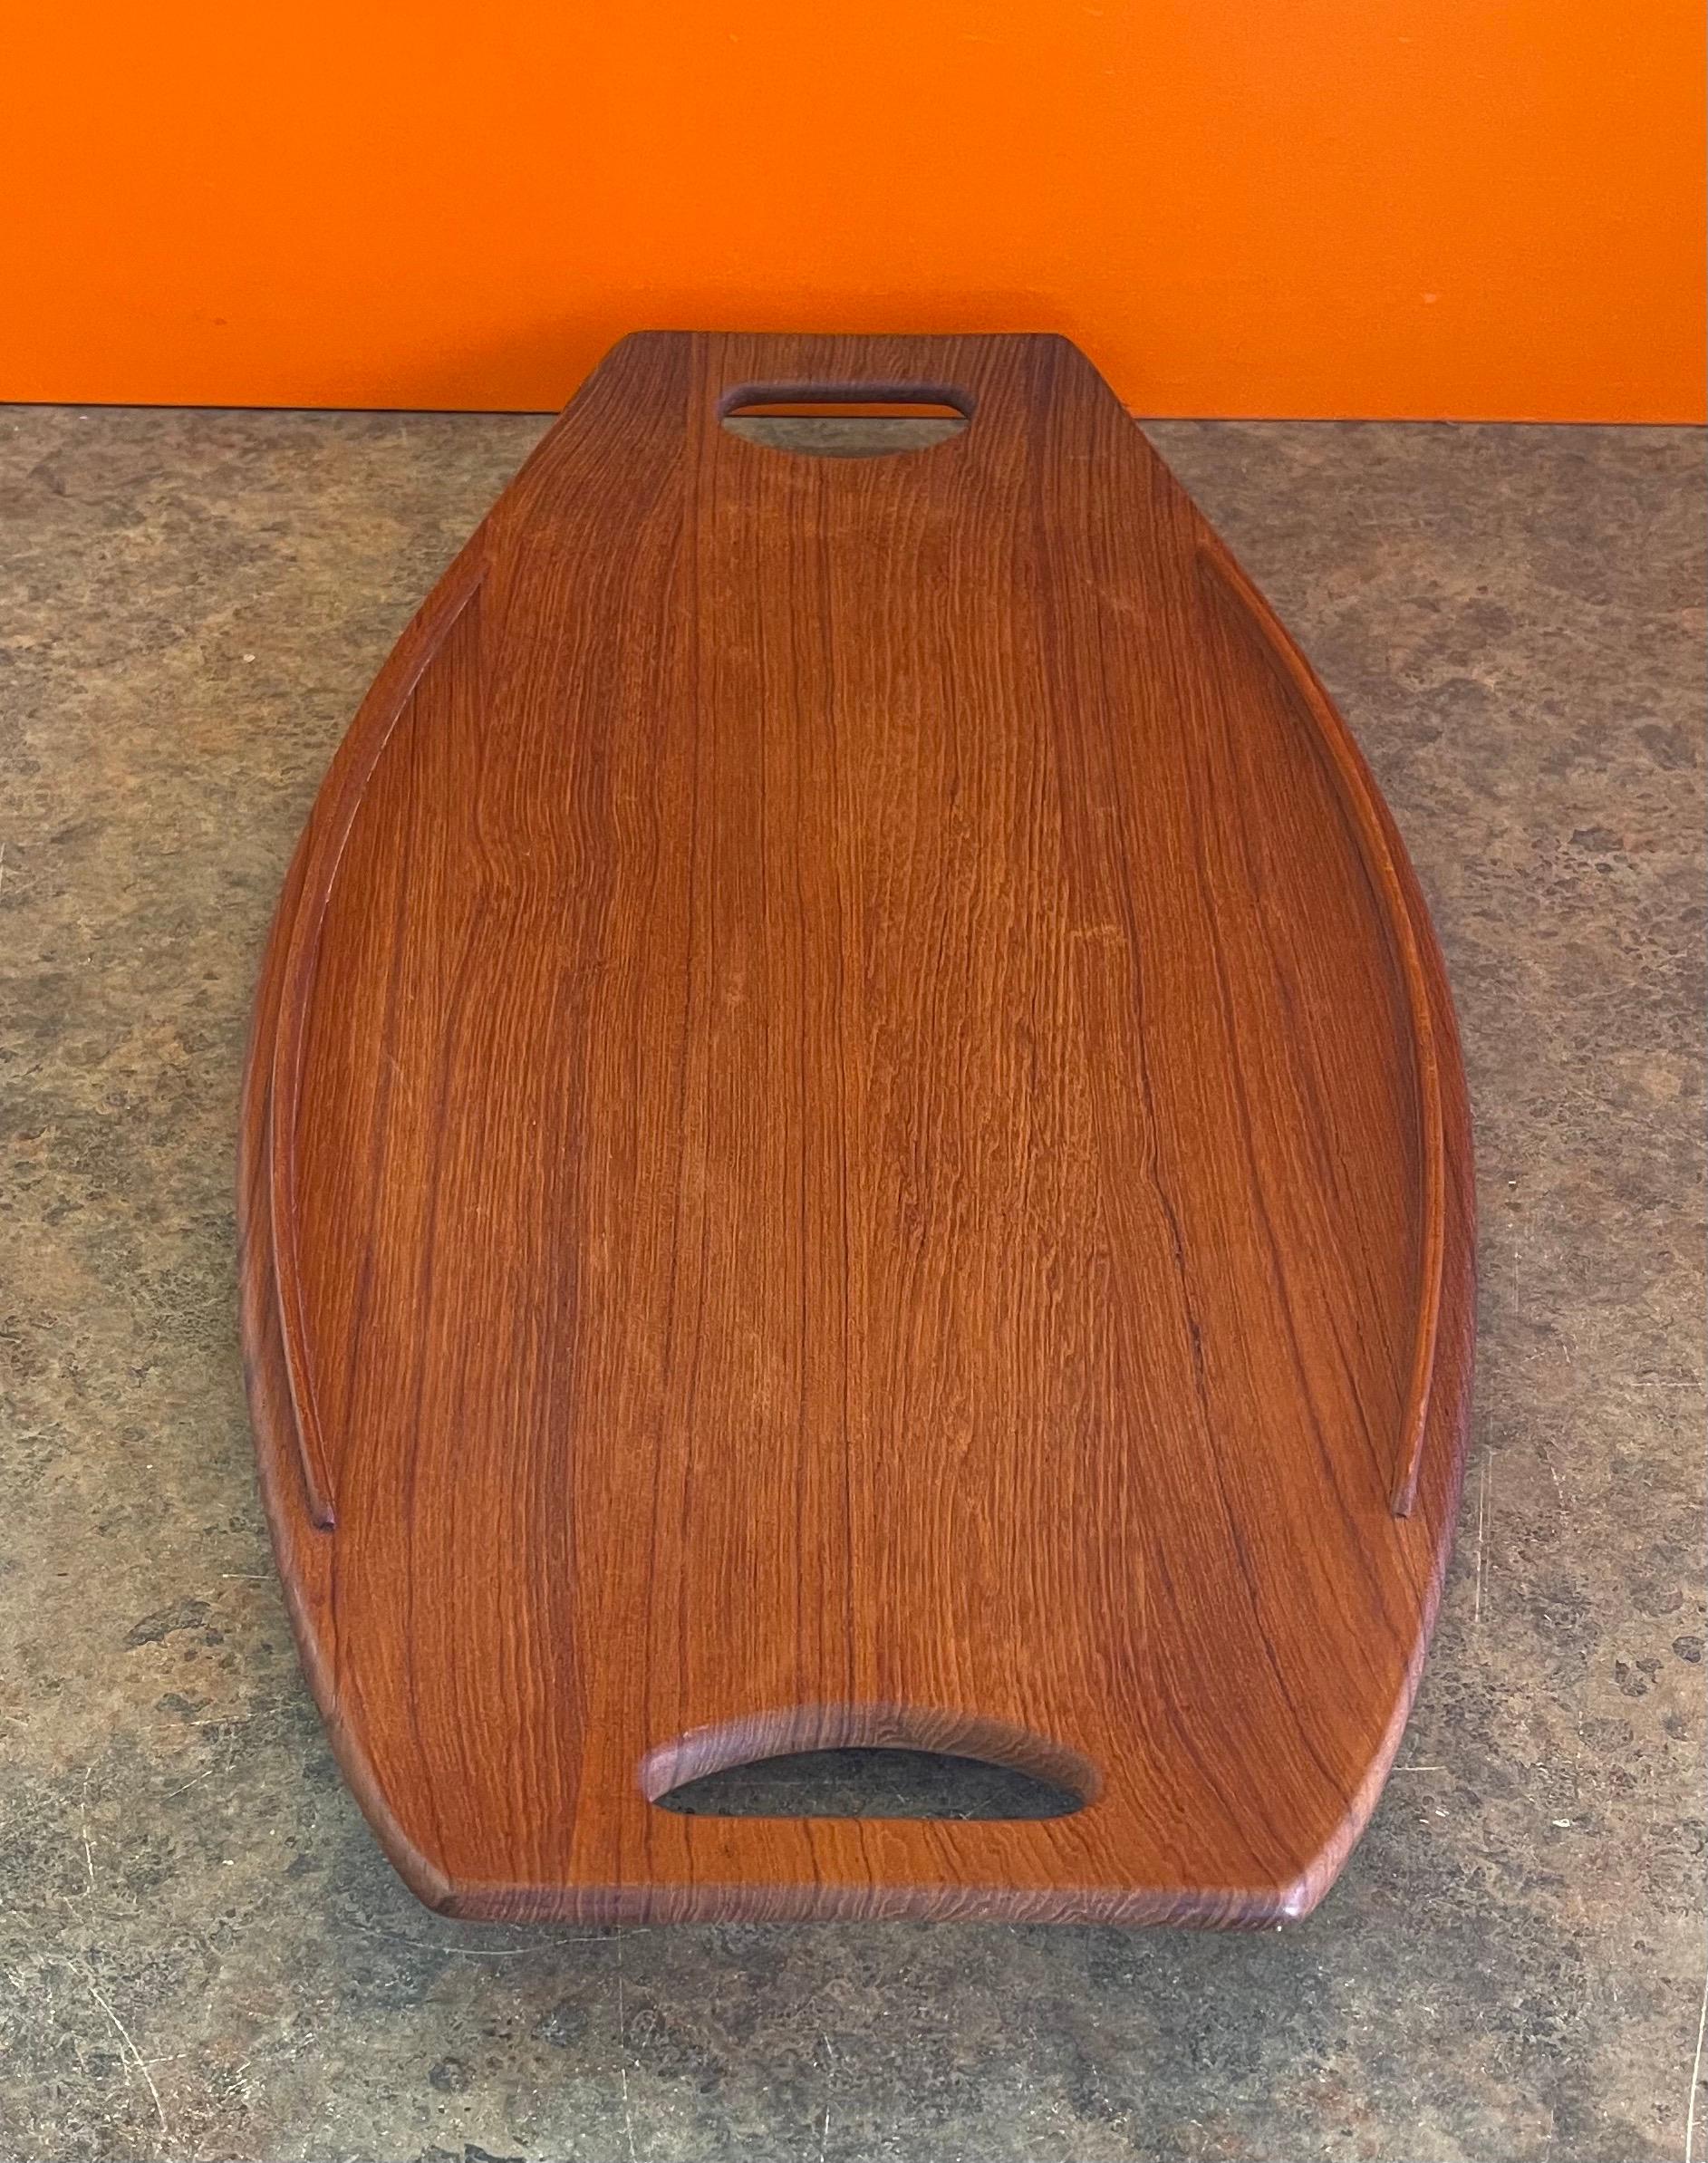 20th Century Large Teak Gondola Tray by Jens Quistgaard for Dansk, Early Production